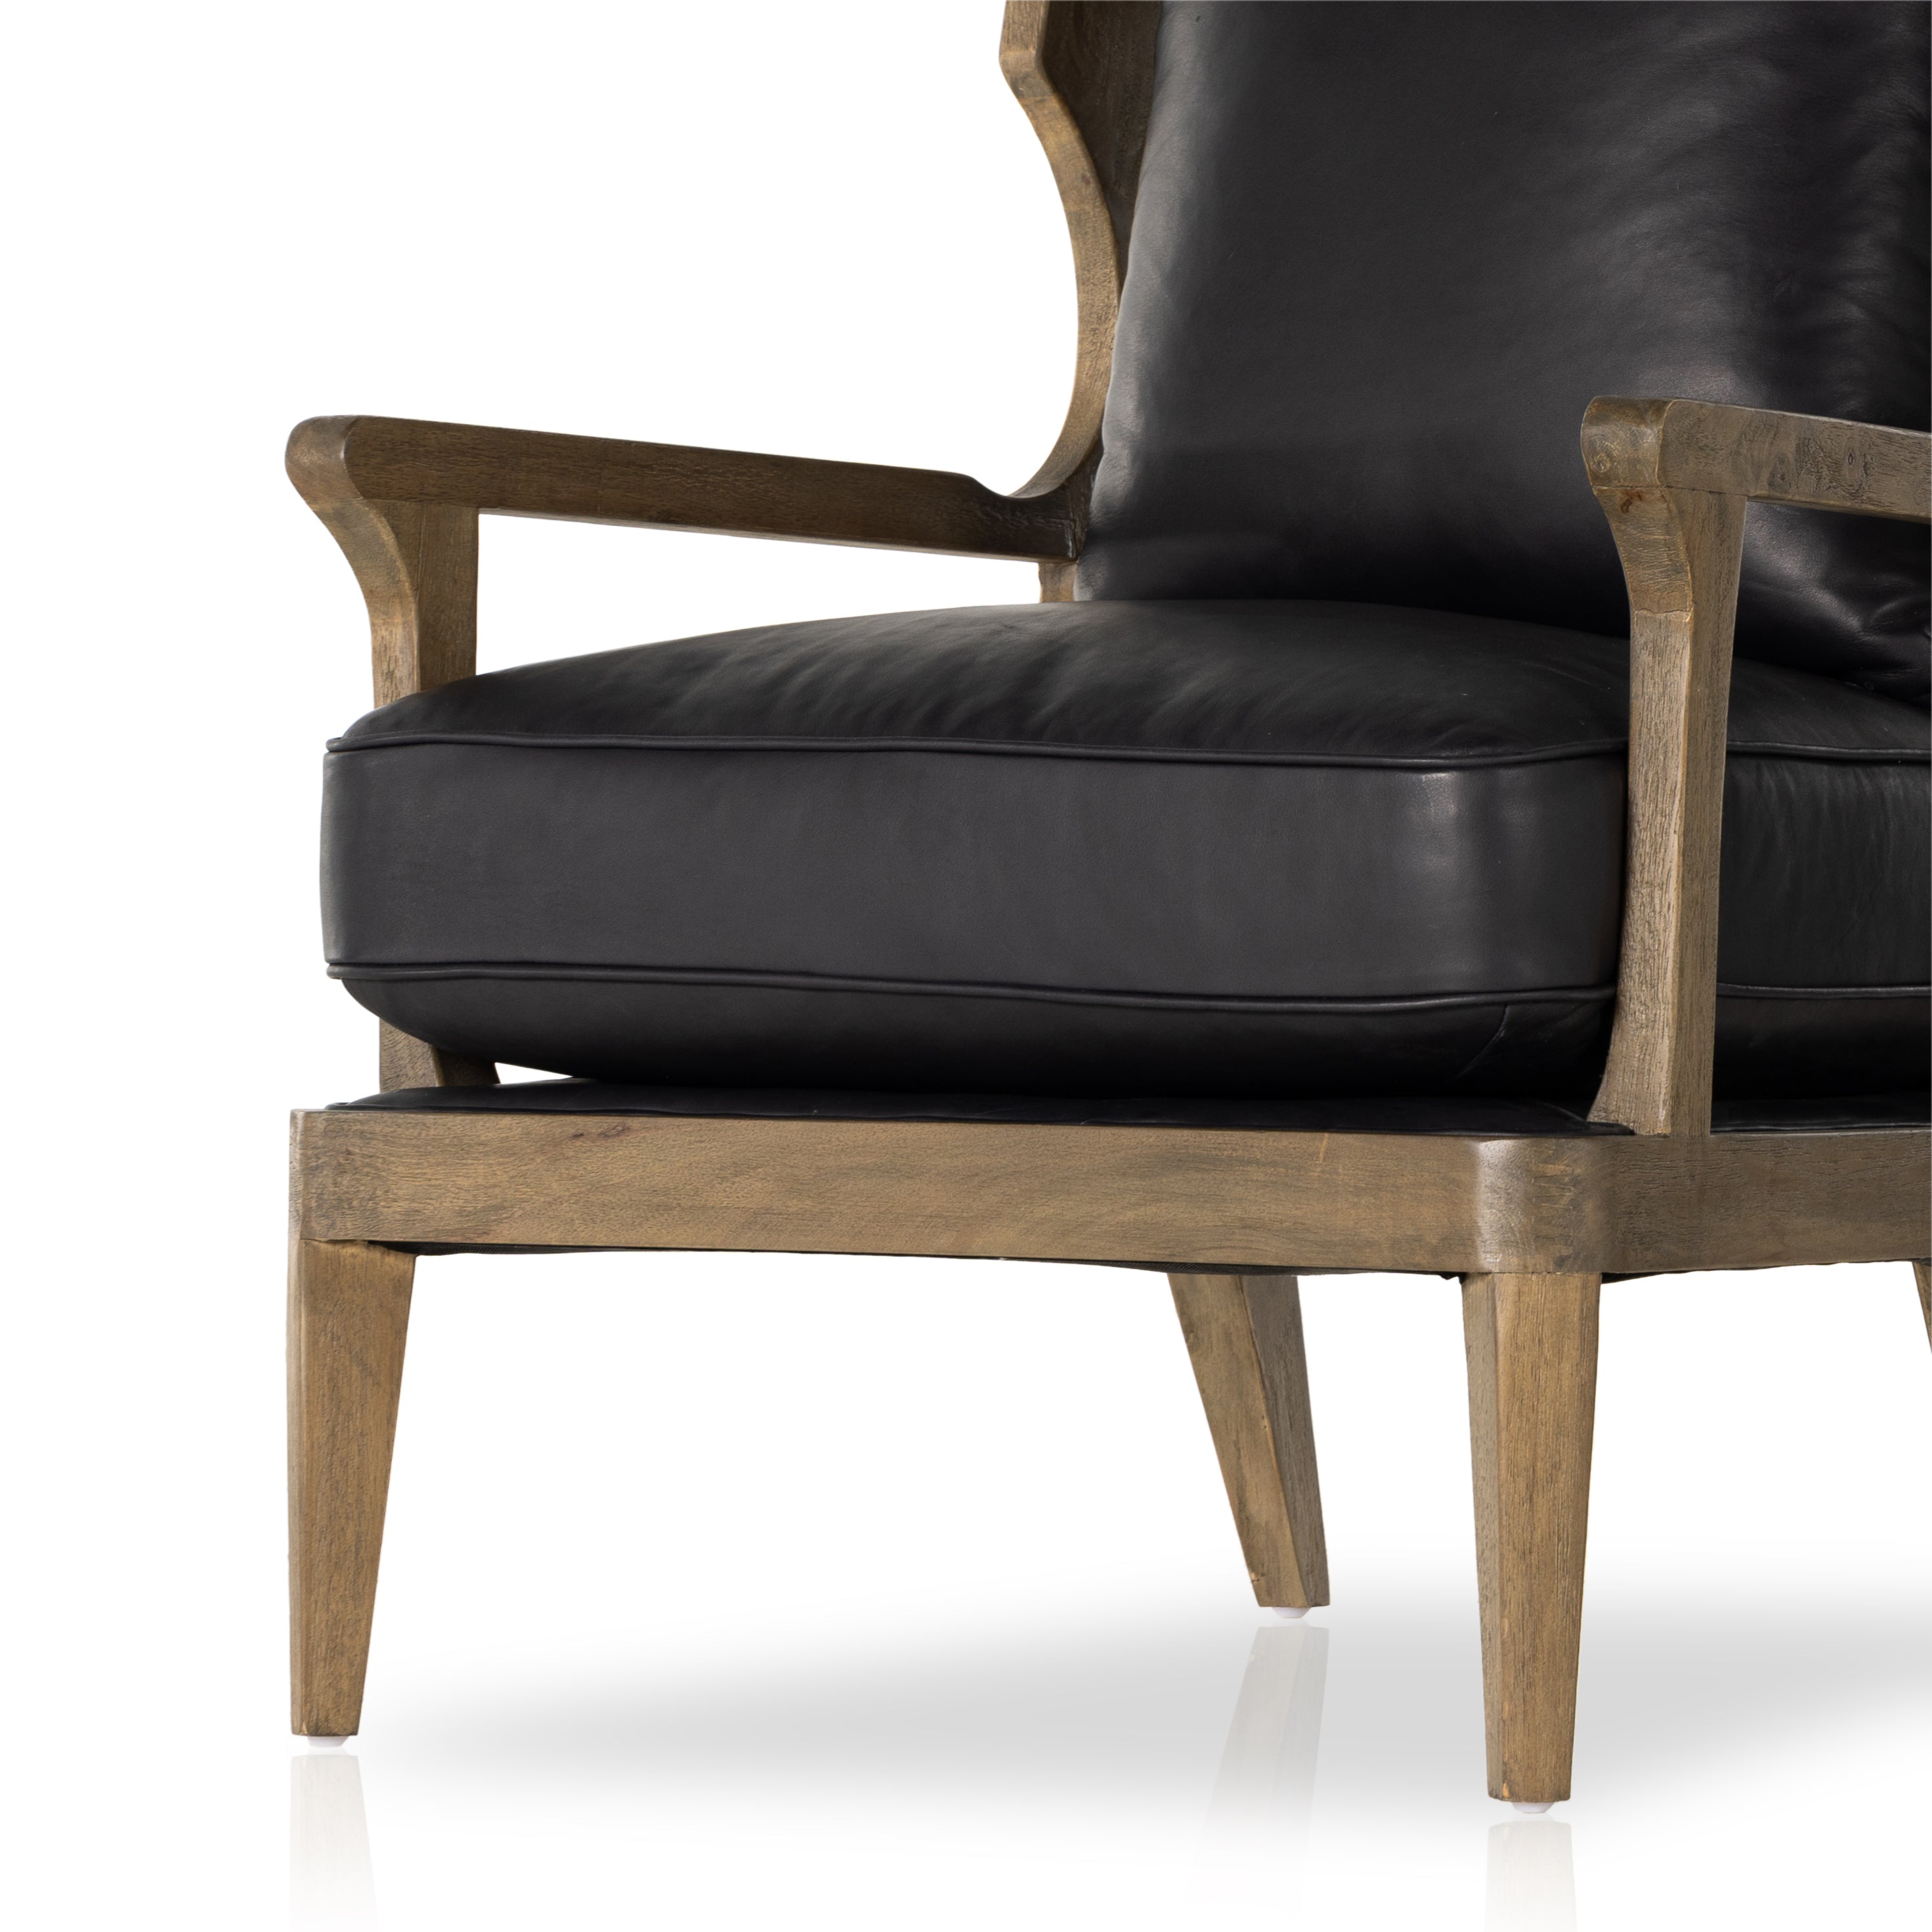 A solid frame of warm oak features a high, ladder back design for a regal air. Upholstered in heirloom black leather. Sourced from one of the oldest family-owned tanneries in Italyâ€™s Bassano del Grappa, heirloom leather is salvaged and processed from upcycled hides featuring an abundance of natural markings, scars and color variations. Amethyst Home provides interior design, new construction, custom furniture, and area rugs in the Newport Beach metro area.